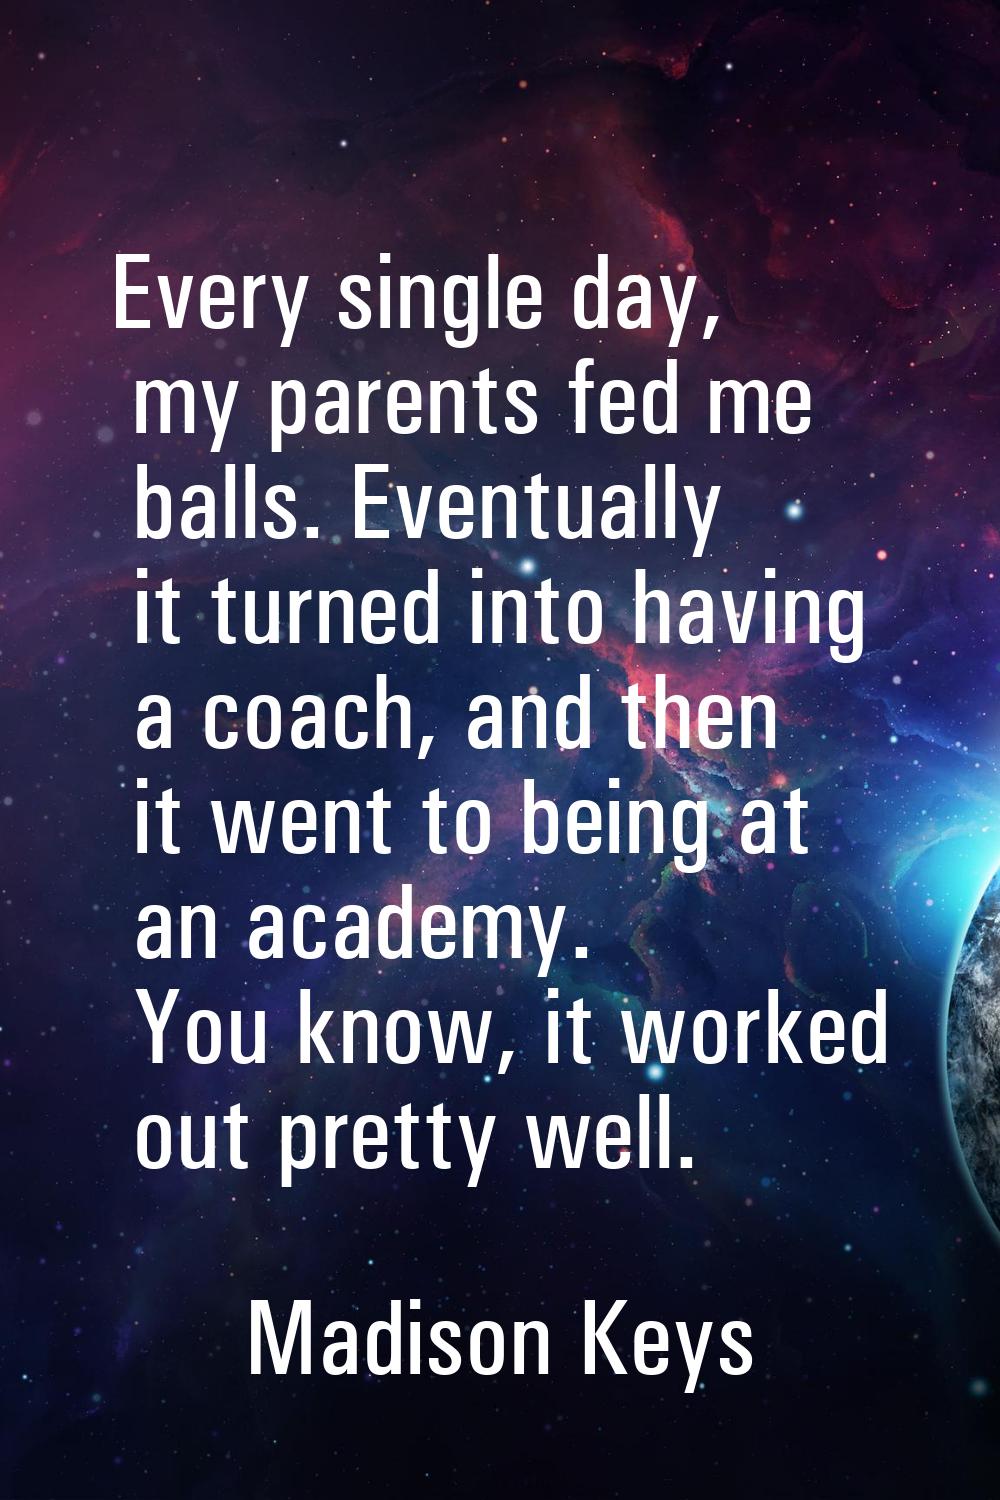 Every single day, my parents fed me balls. Eventually it turned into having a coach, and then it we